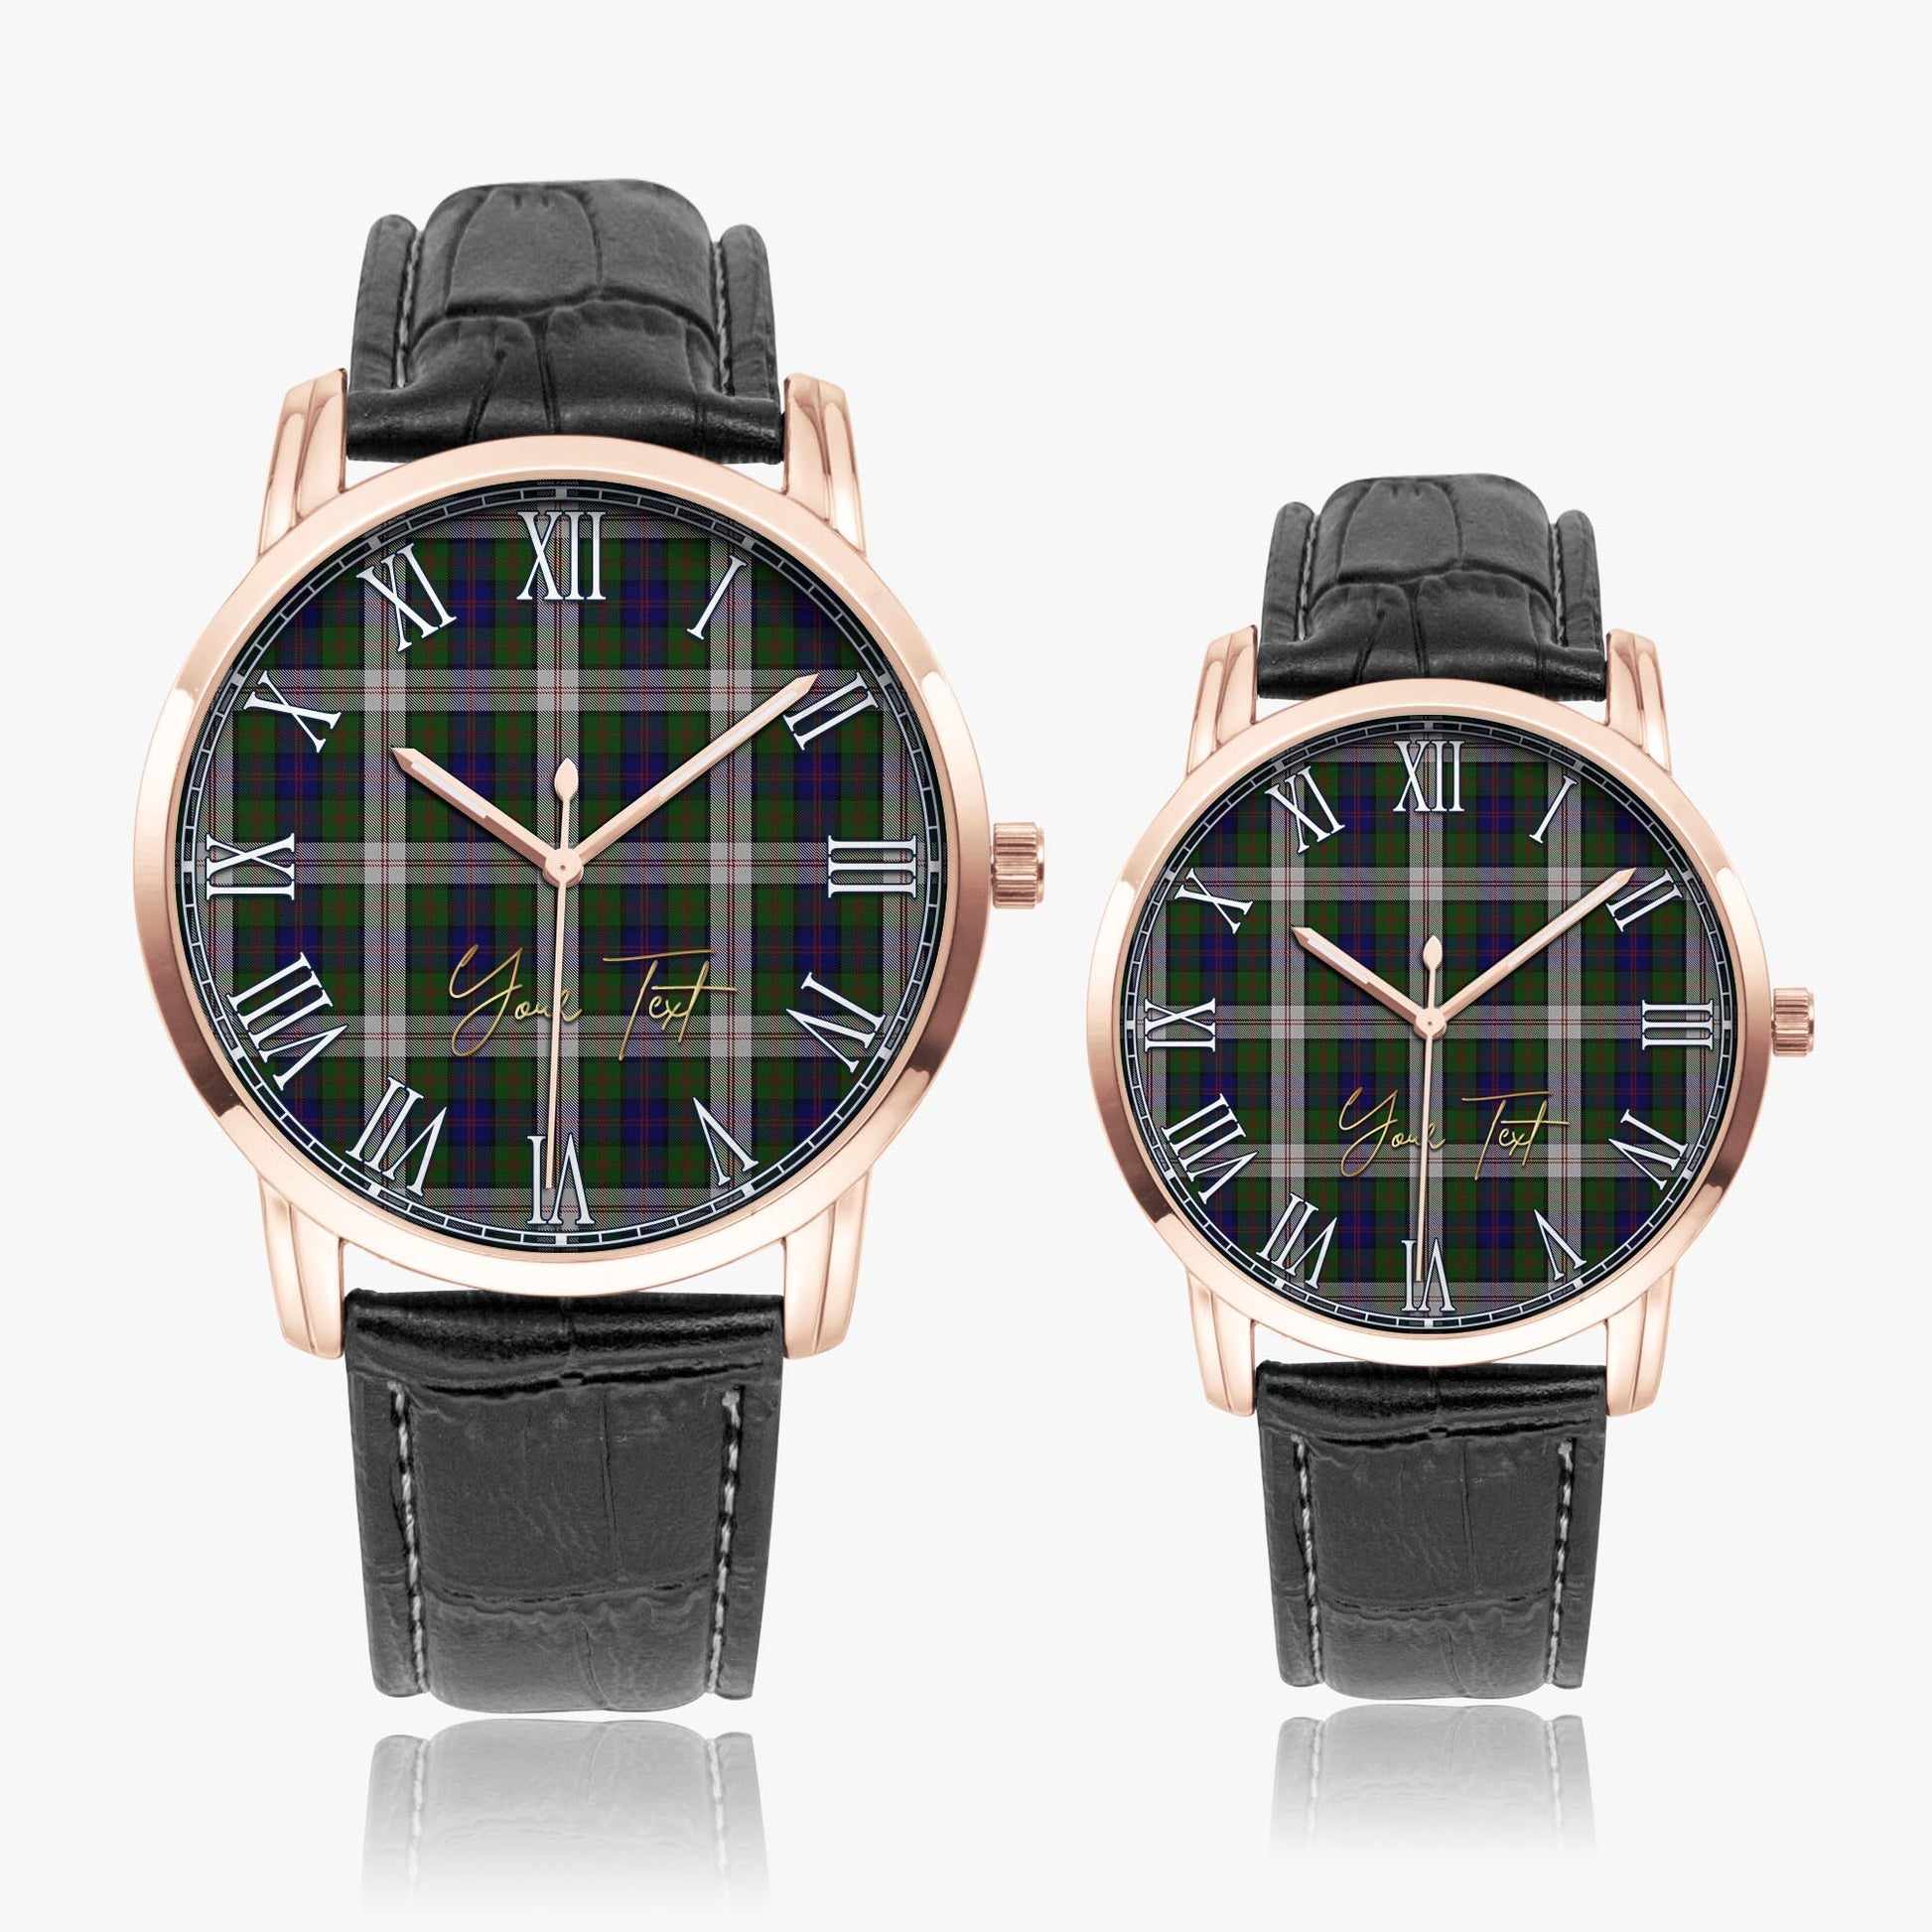 Blair Dress Tartan Personalized Your Text Leather Trap Quartz Watch Wide Type Rose Gold Case With Black Leather Strap - Tartanvibesclothing